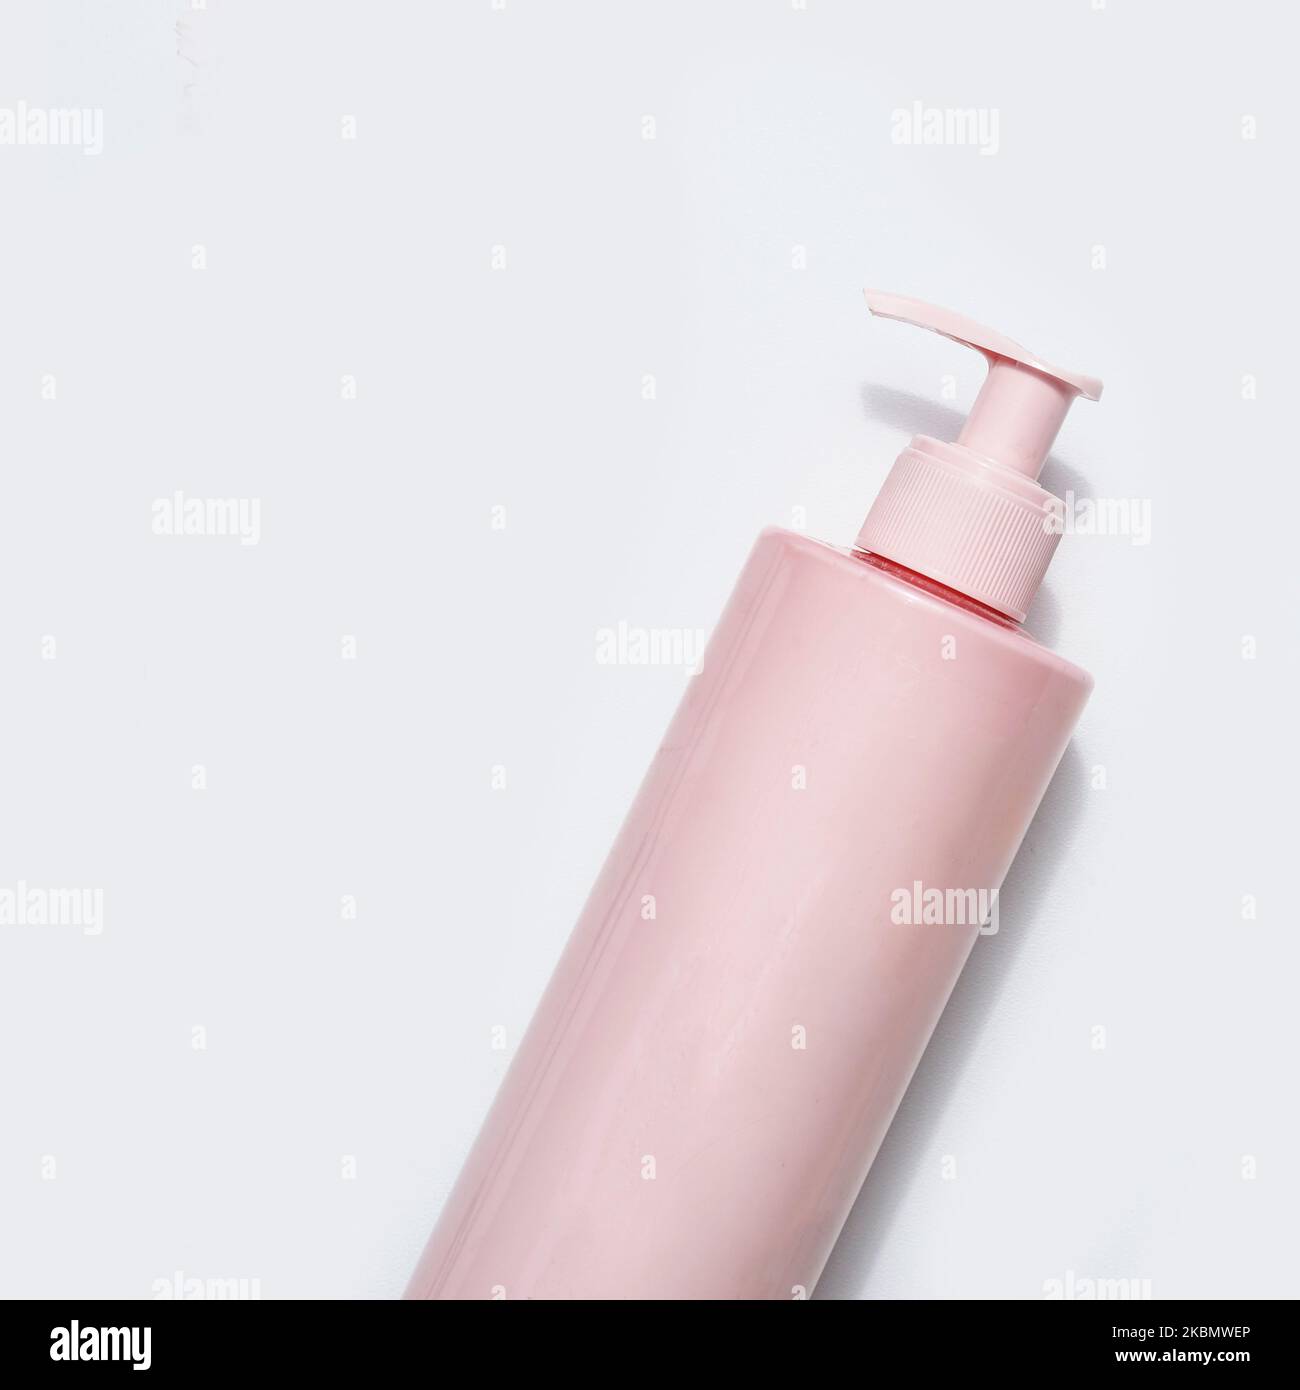 Pink beauty product bottle with pumps on white background, top view Stock Photo